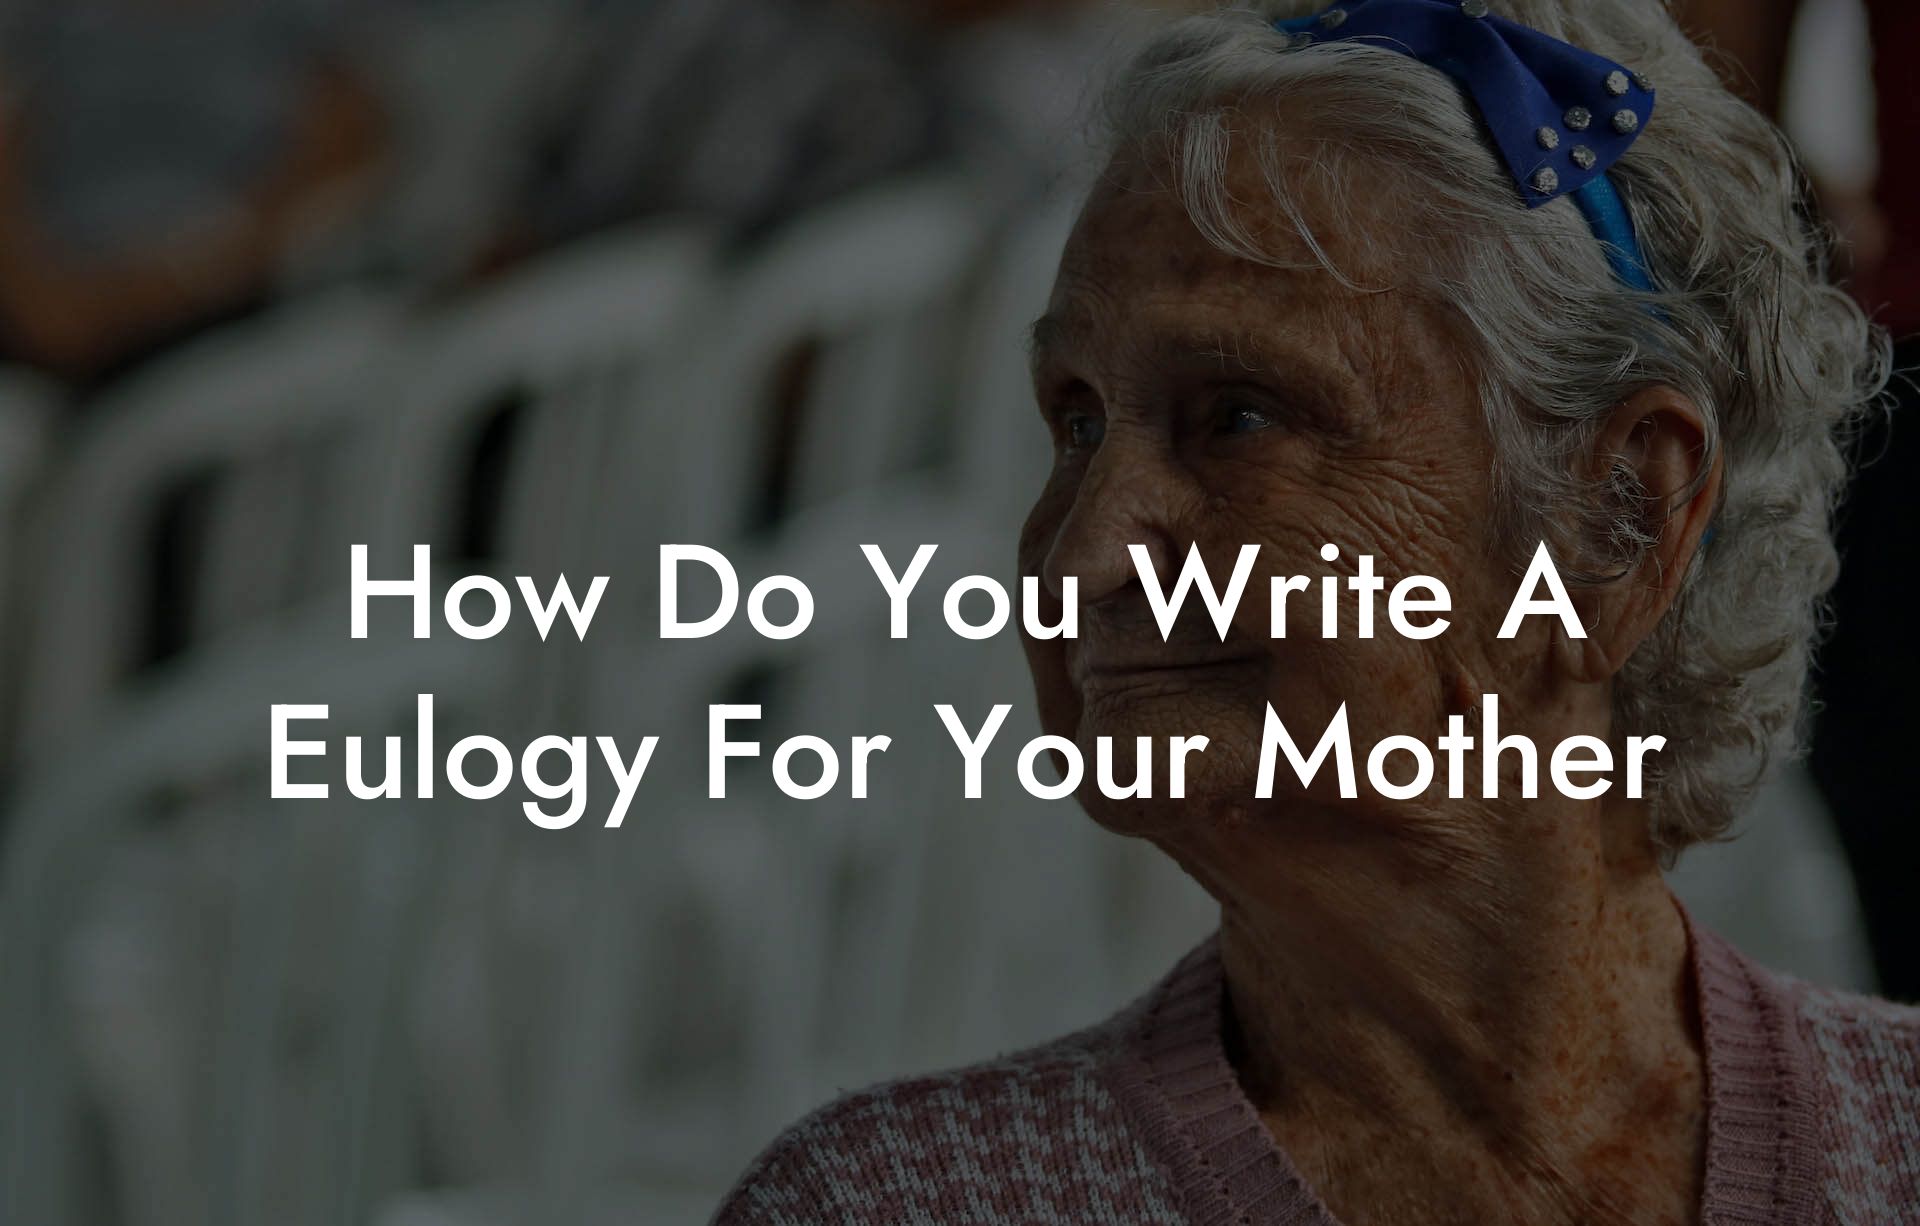 How Do You Write A Eulogy For Your Mother